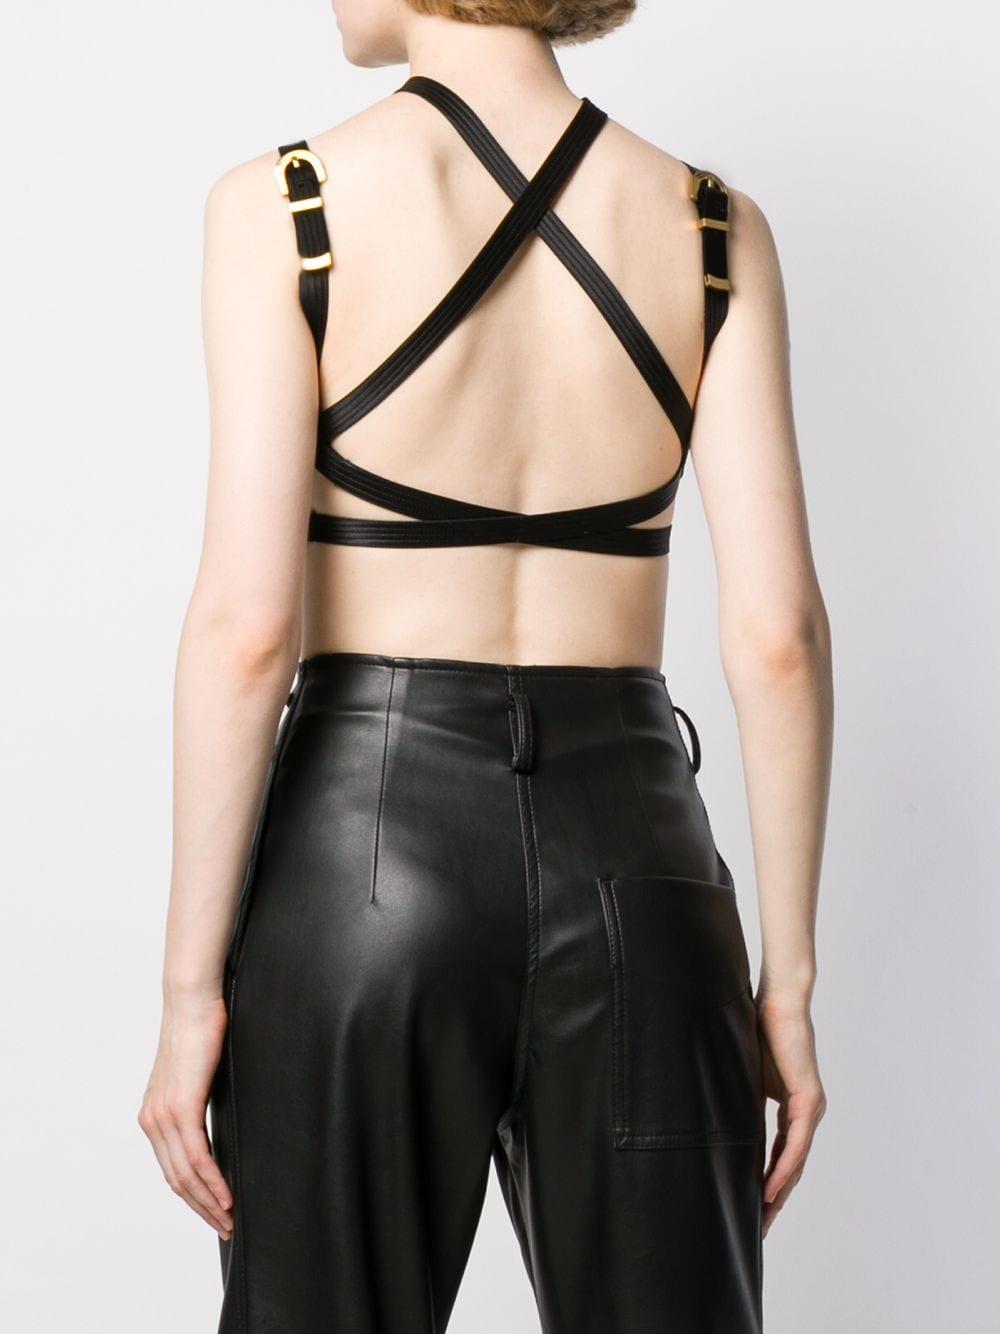 Versace Fall 2019 Runway Top noir cropped bondage Taille 40 Neuf à Paradise Island, BS